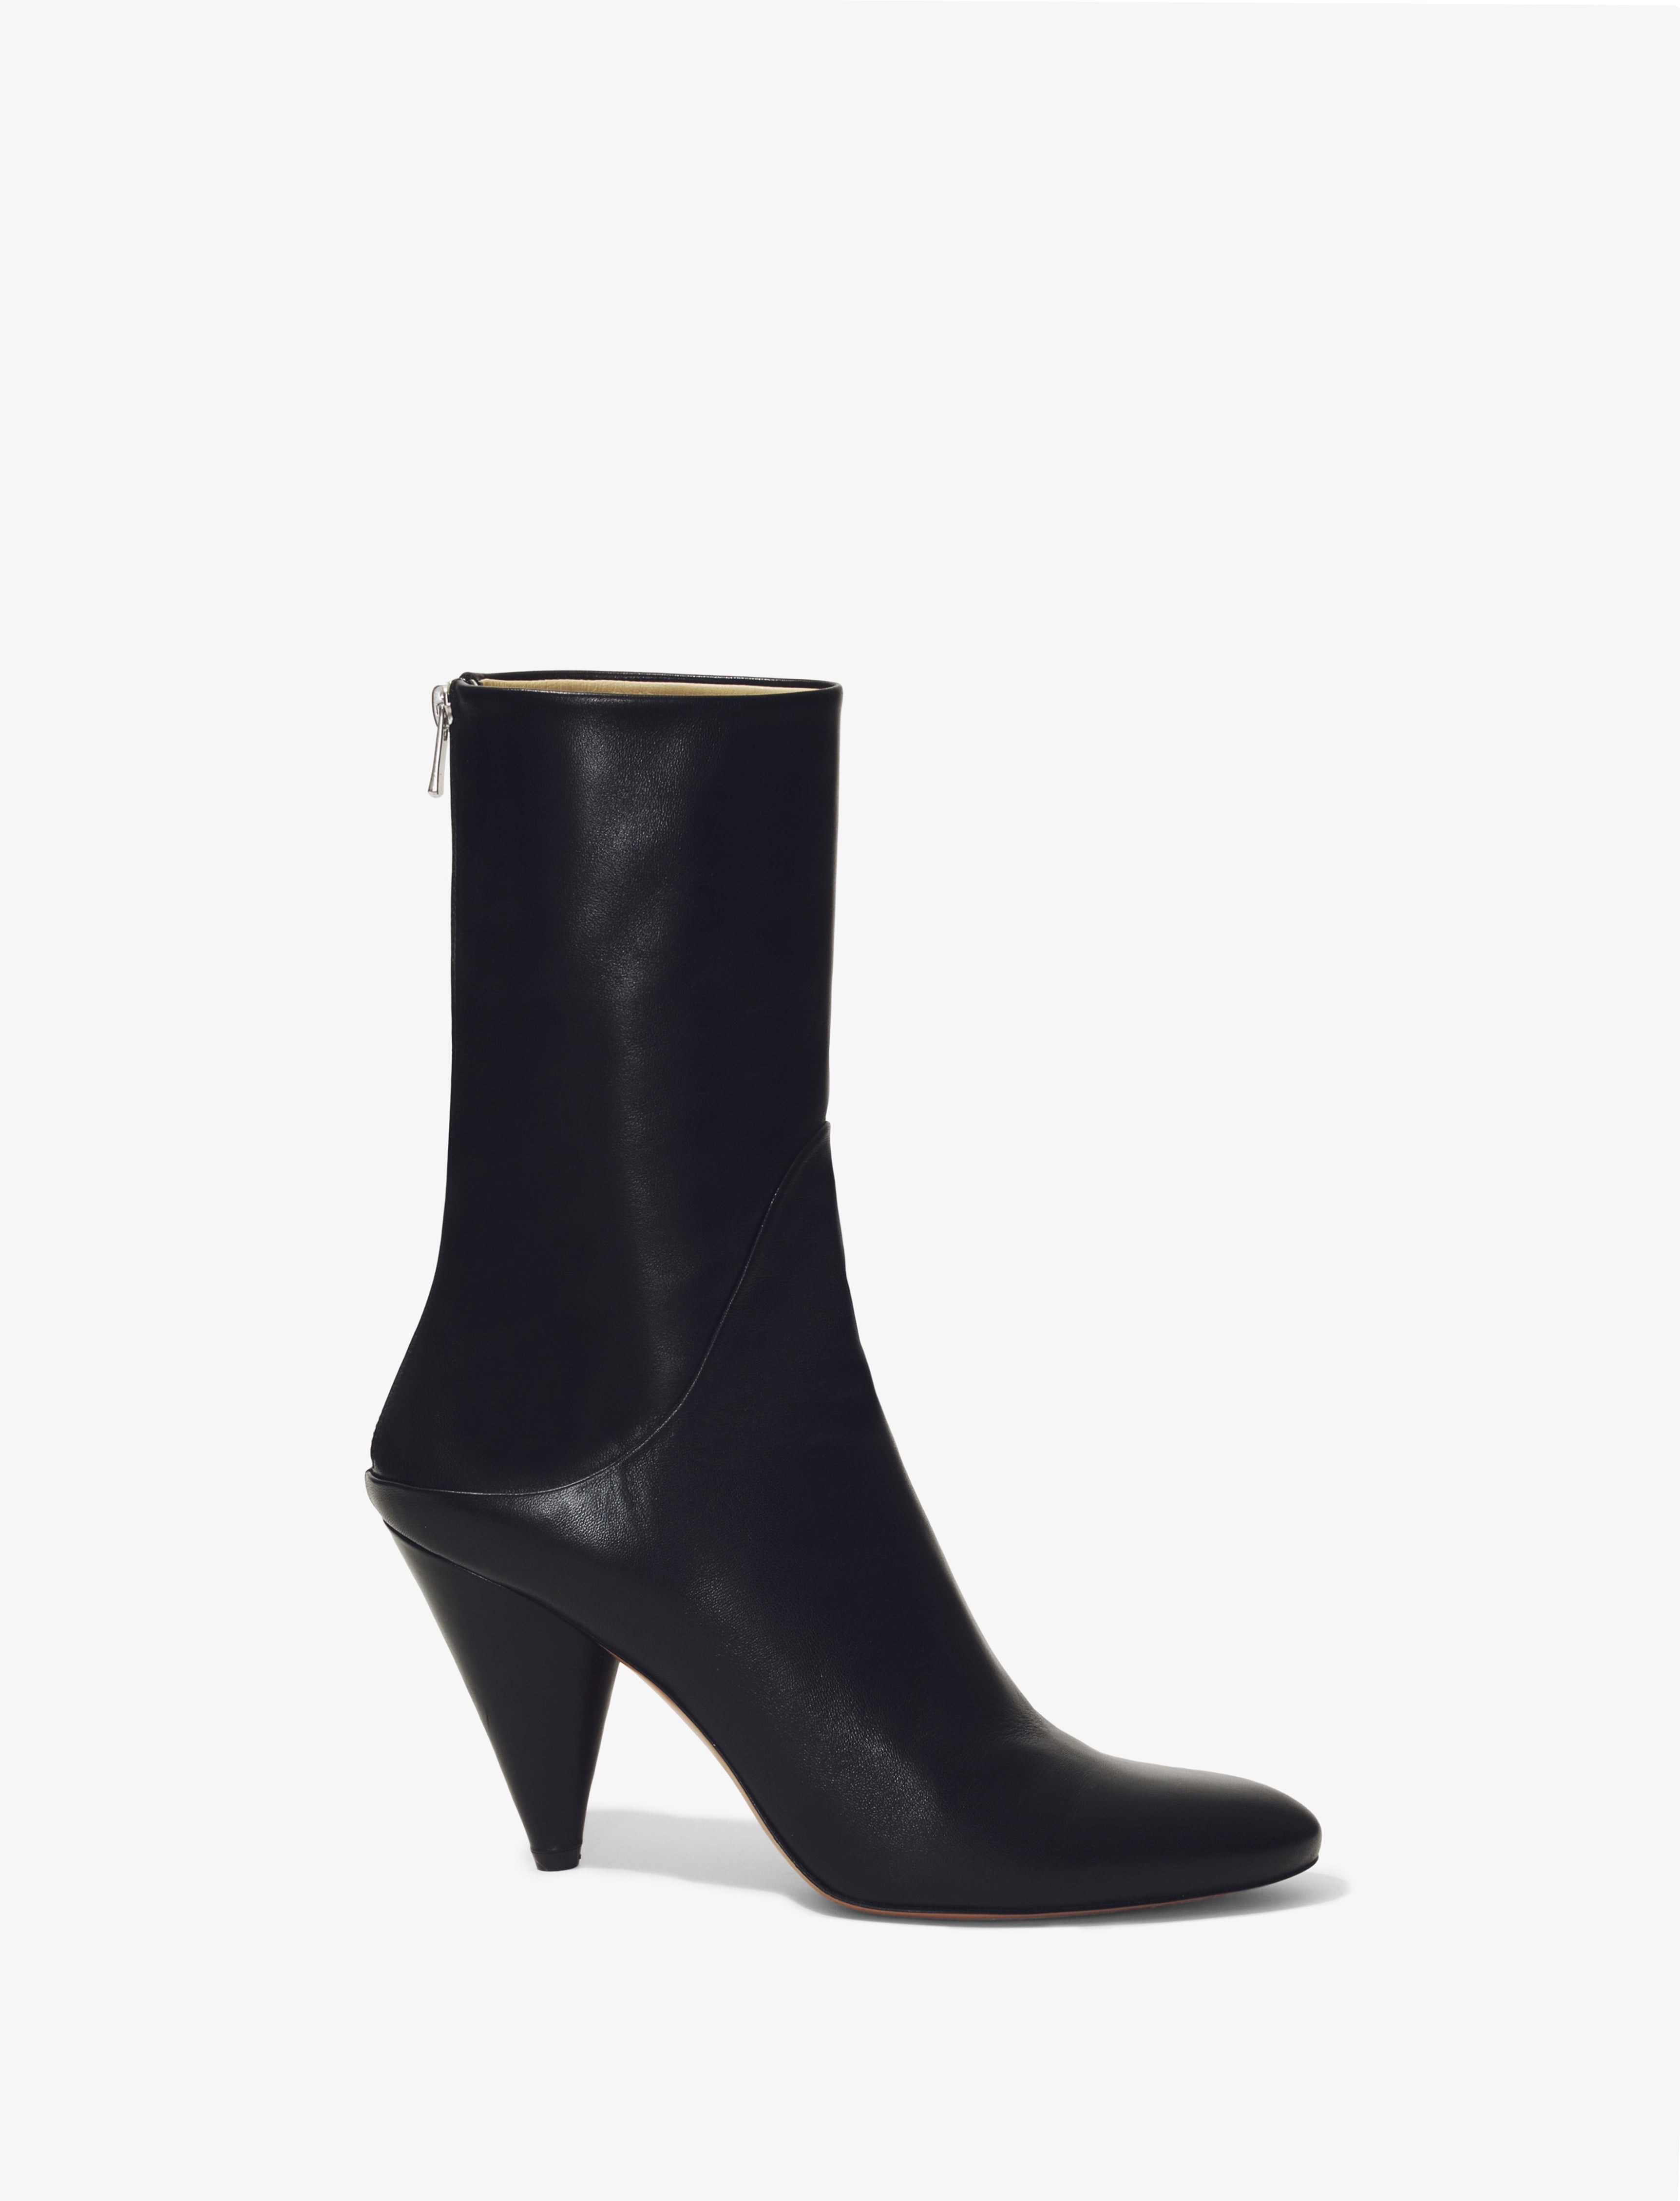 Witch 110 leather ankle boots in black - Balenciaga | Mytheresa